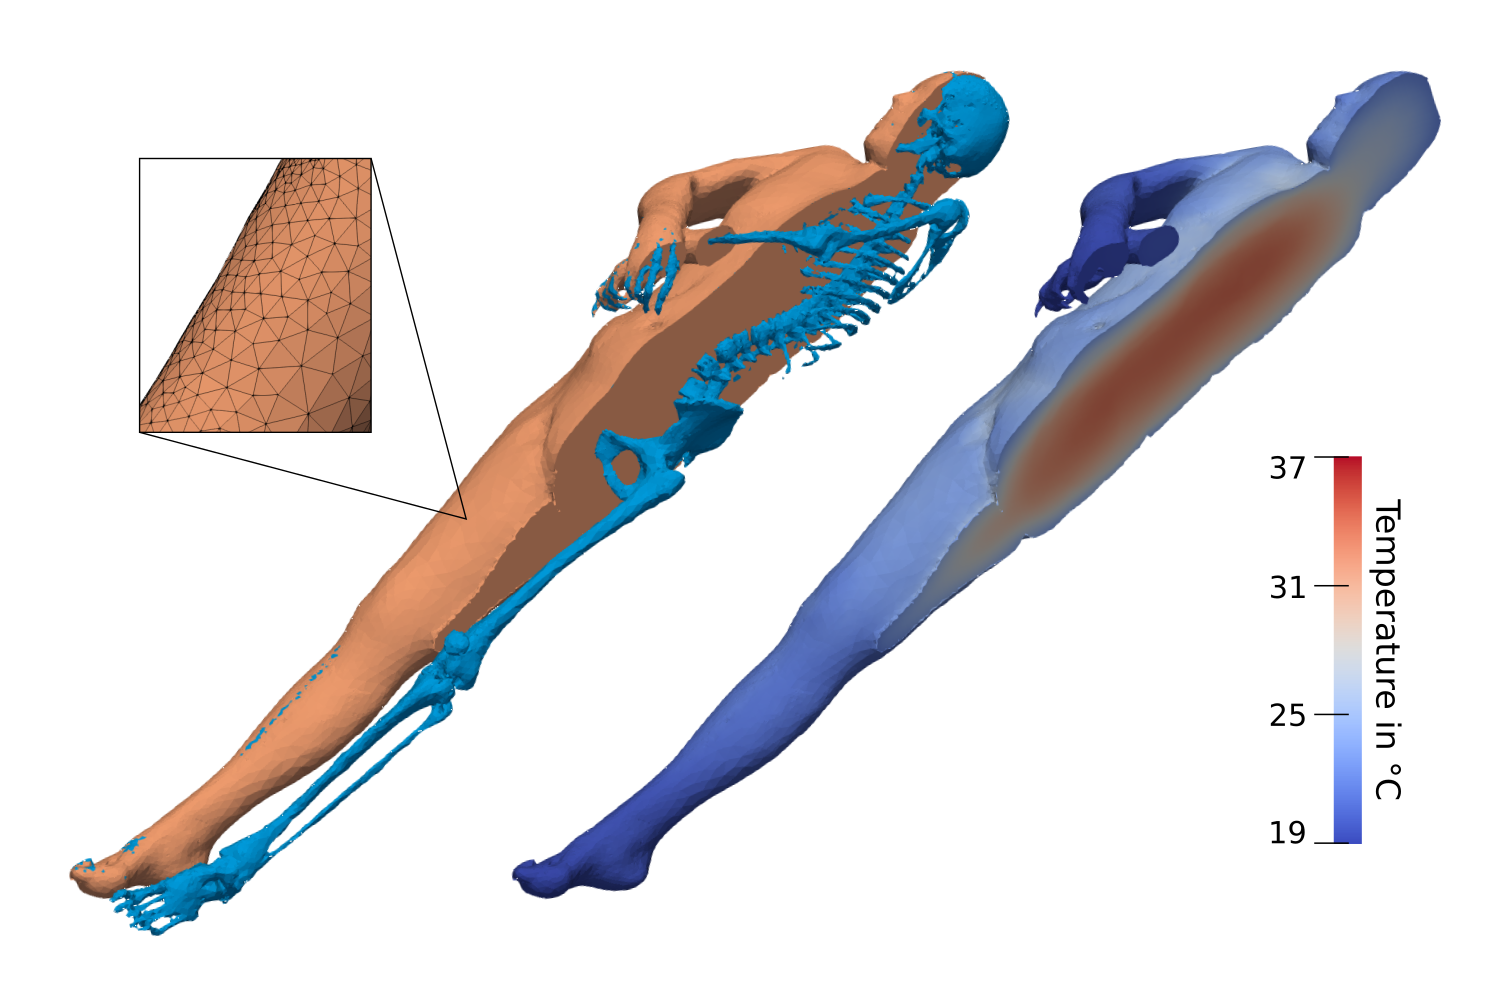 CT-generated body geometry as a tetrahedral grid with different tissue types (here using the example of bones) as well as FE simulation of cooling